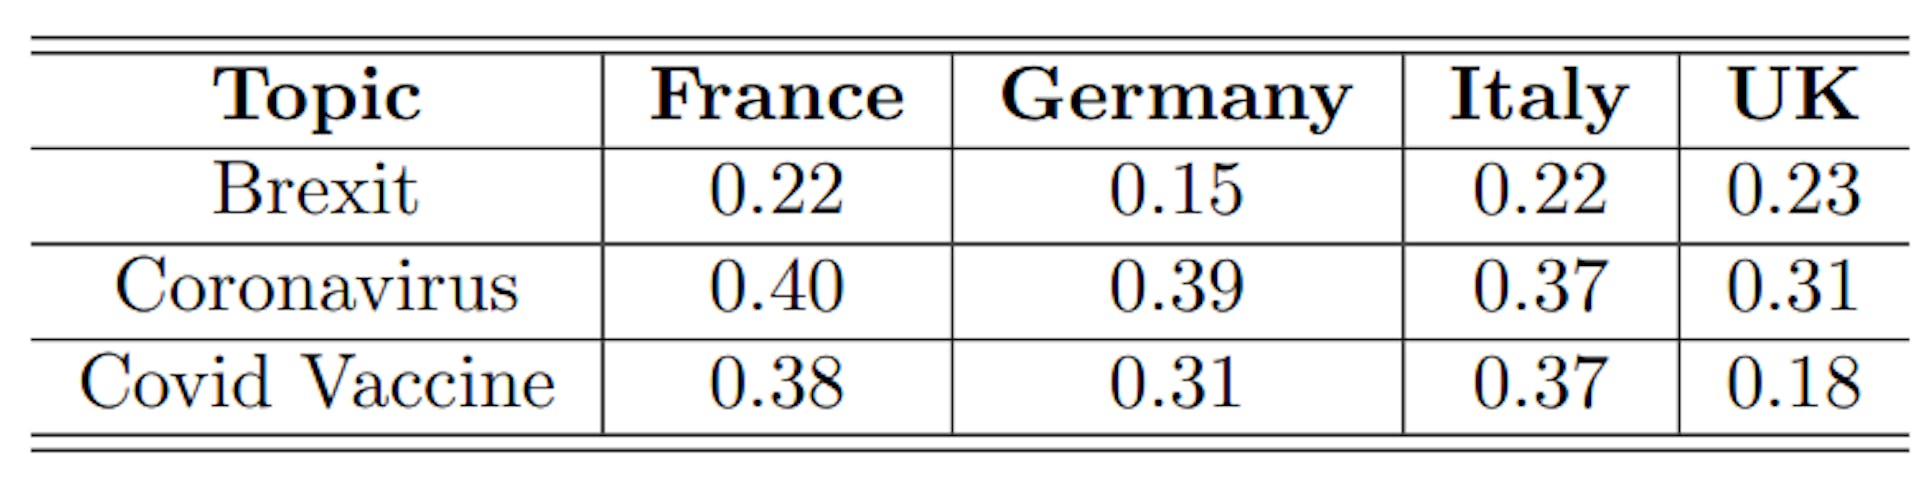 Table 2: Edge Density topic and country wise